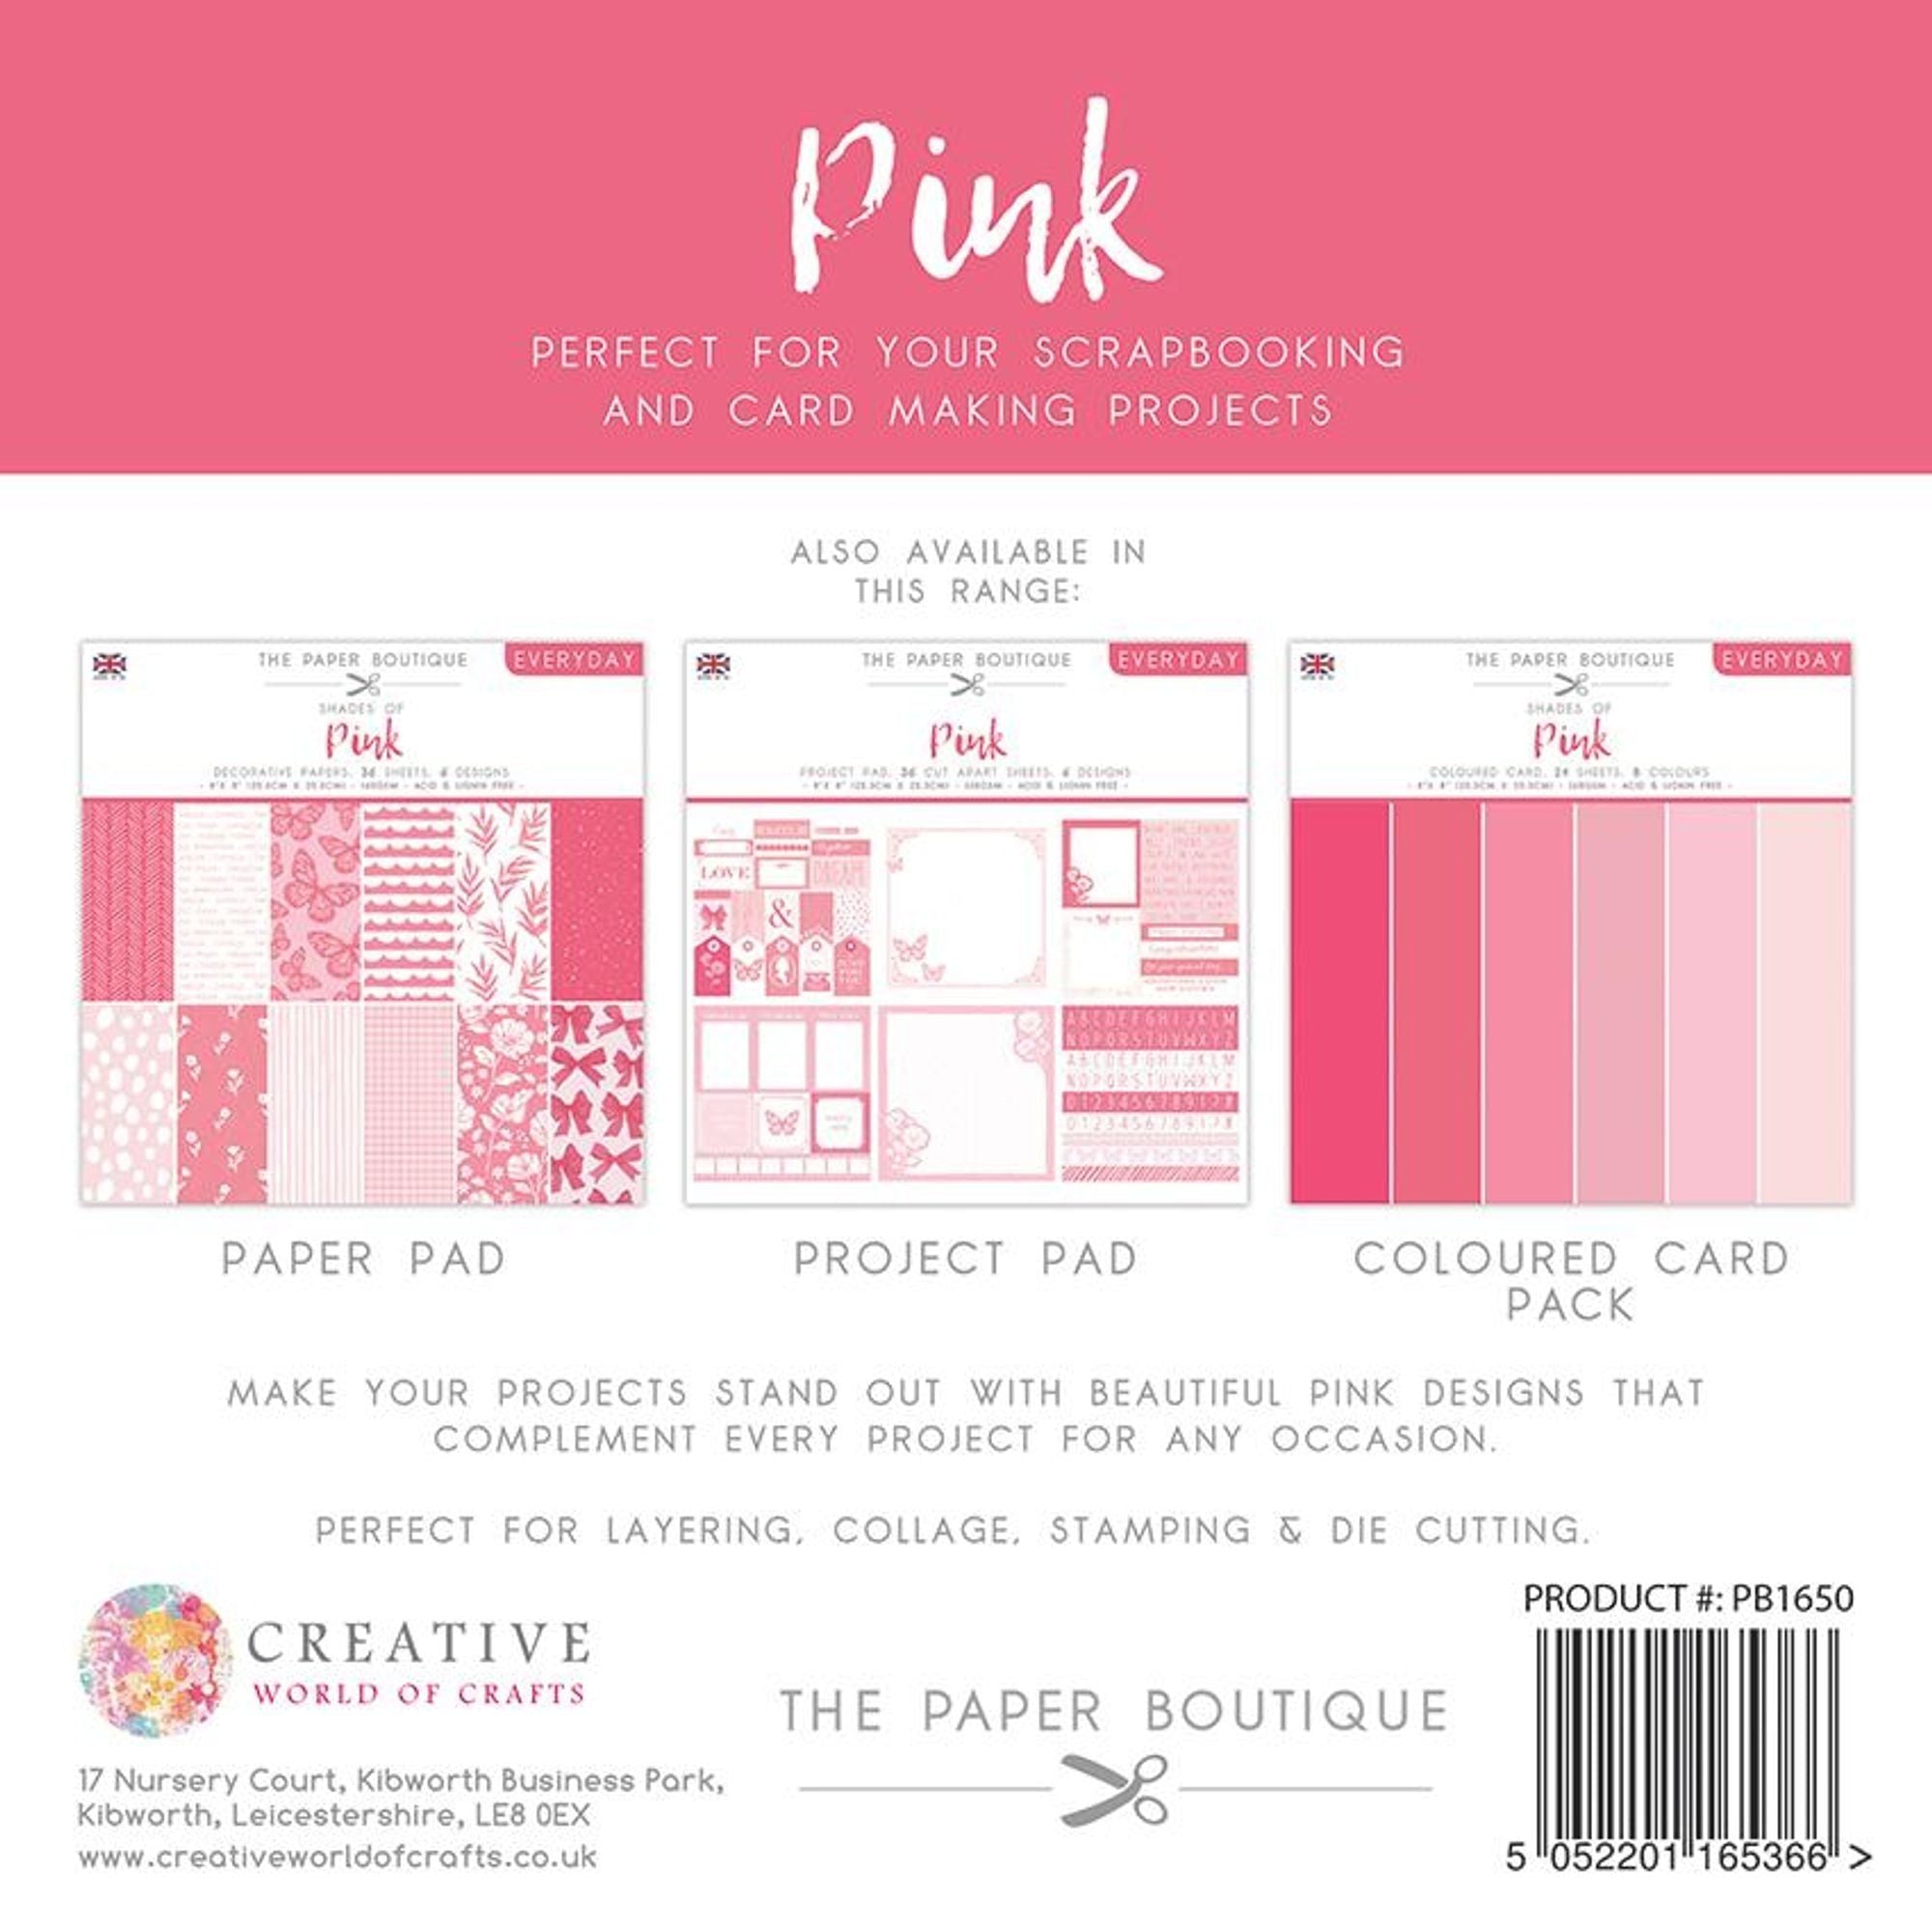 The Paper Boutique Everyday - Shades Of - Pink 8 in x 8 in Colours